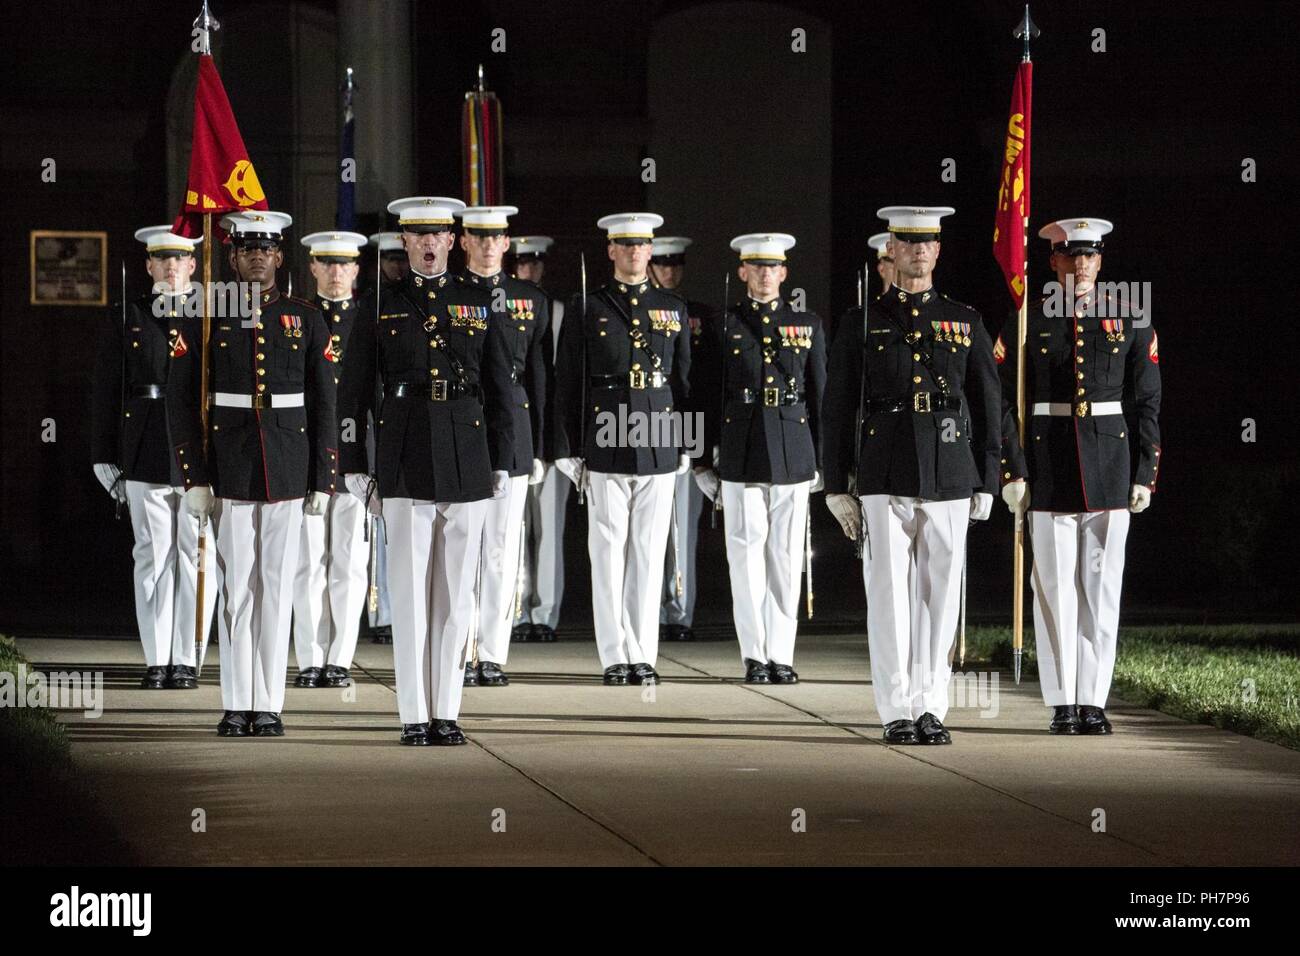 Marines with Marine Barracks Washington D.C. march down Center Walk during a Friday Evening Parade at the Barracks, June 29, 2018. The guest of honor for the ceremony was the Under Secretary of the Navy, Thomas B. Modly, and the hosting official was the Assistant Commandant of the Marine Corps, Gen. Glenn M. Walters. Stock Photo